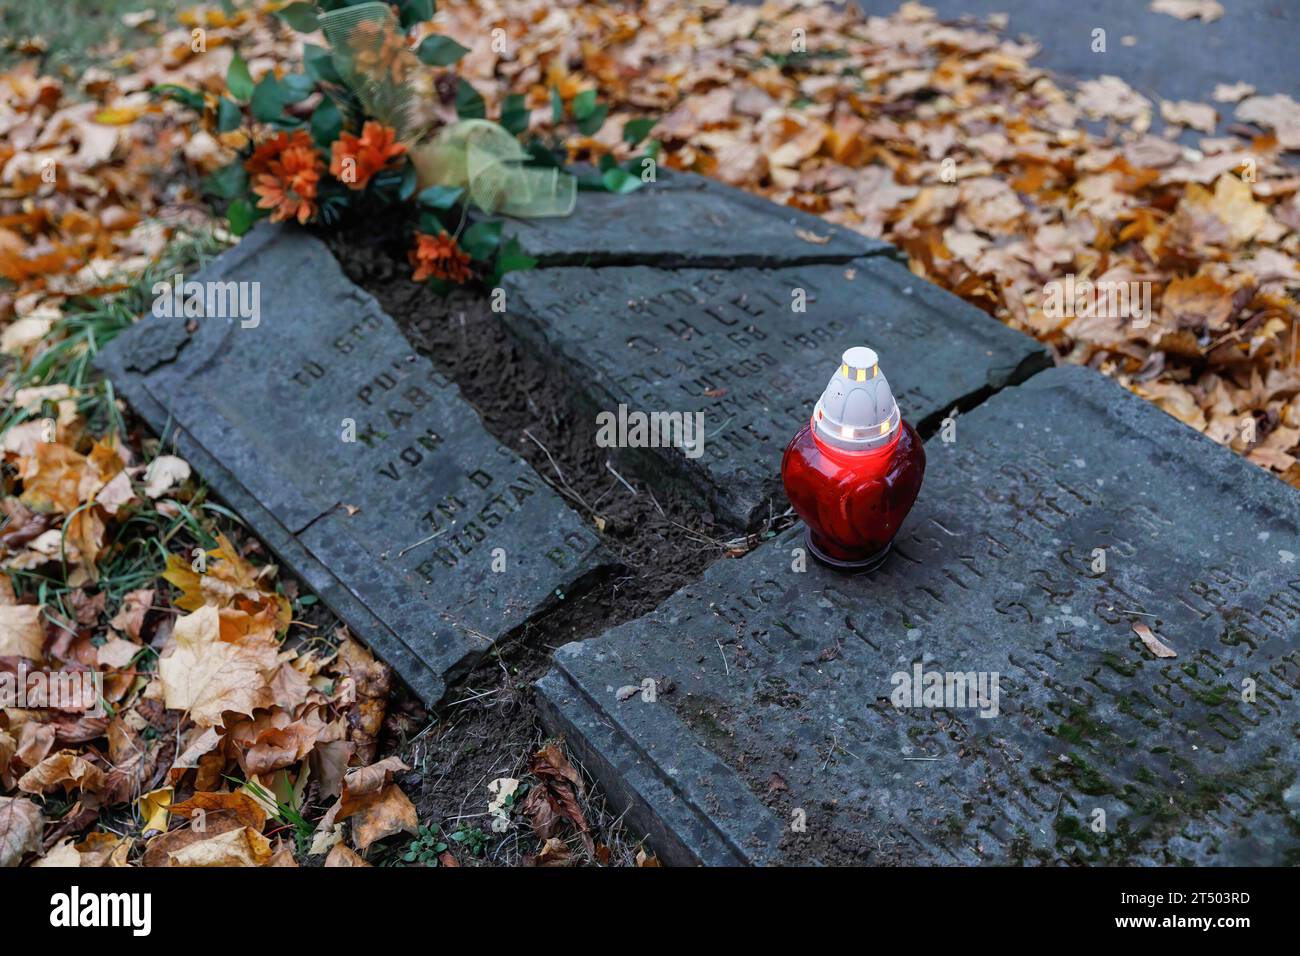 Warsaw, Poland. 1st Nov, 2023. A candle in a lantern stands on a broken tombstone on All Saints' Day at the Evangelical-Augsburg Cemetery in Warsaw. All Saints' Day (or Dzie? Zaduszny in Polish) is a public holiday in Poland. It is an opportunity to remember deceased relatives. On this day, people bring flowers, typically chrysanthemums, and candles to cemeteries. The entire cemetery is filled with lights in the darkness. The Evangelical-Augsburg Cemetery is a historic Lutheran Protestant cemetery located in the western part of Warsaw. Since its opening in 1792, more than 100,000 people hav Stock Photo